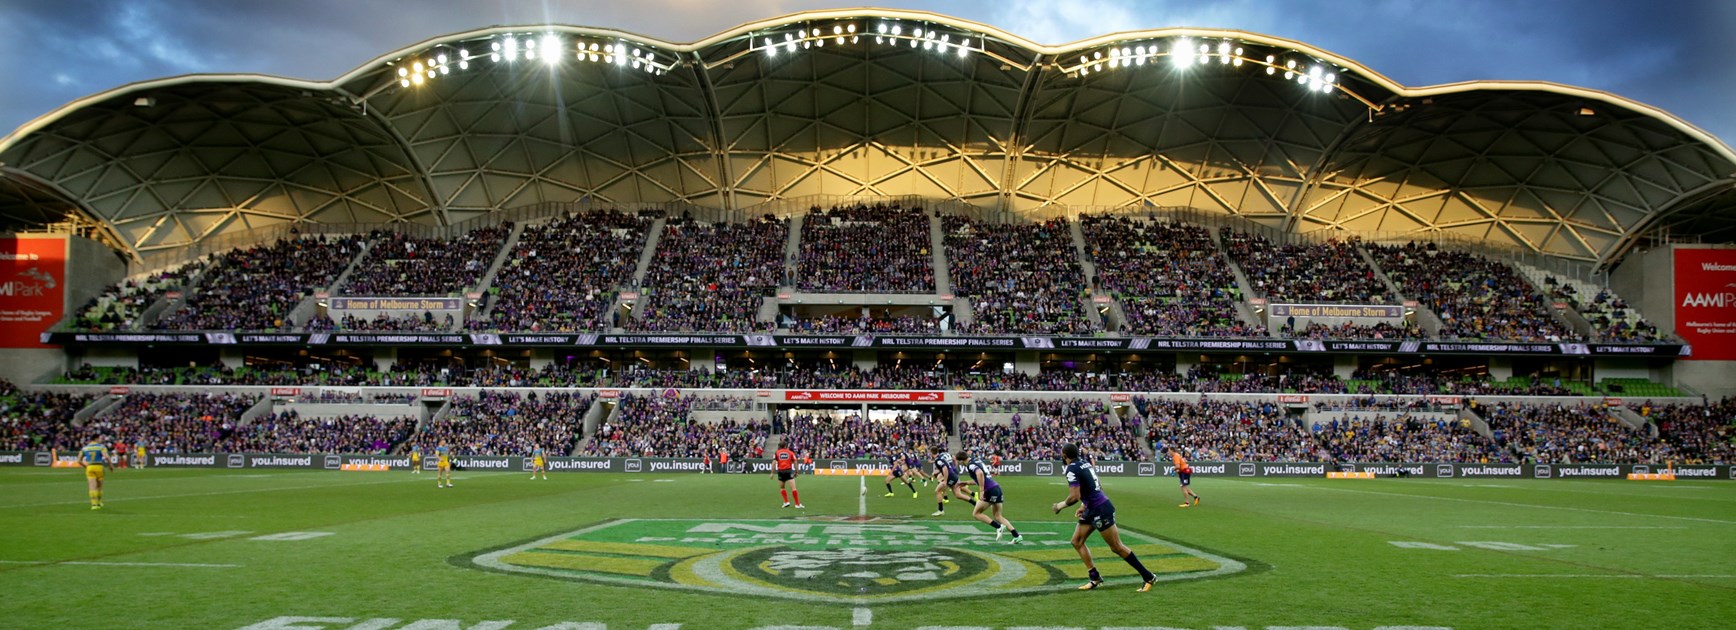 10 years of AAMI Park